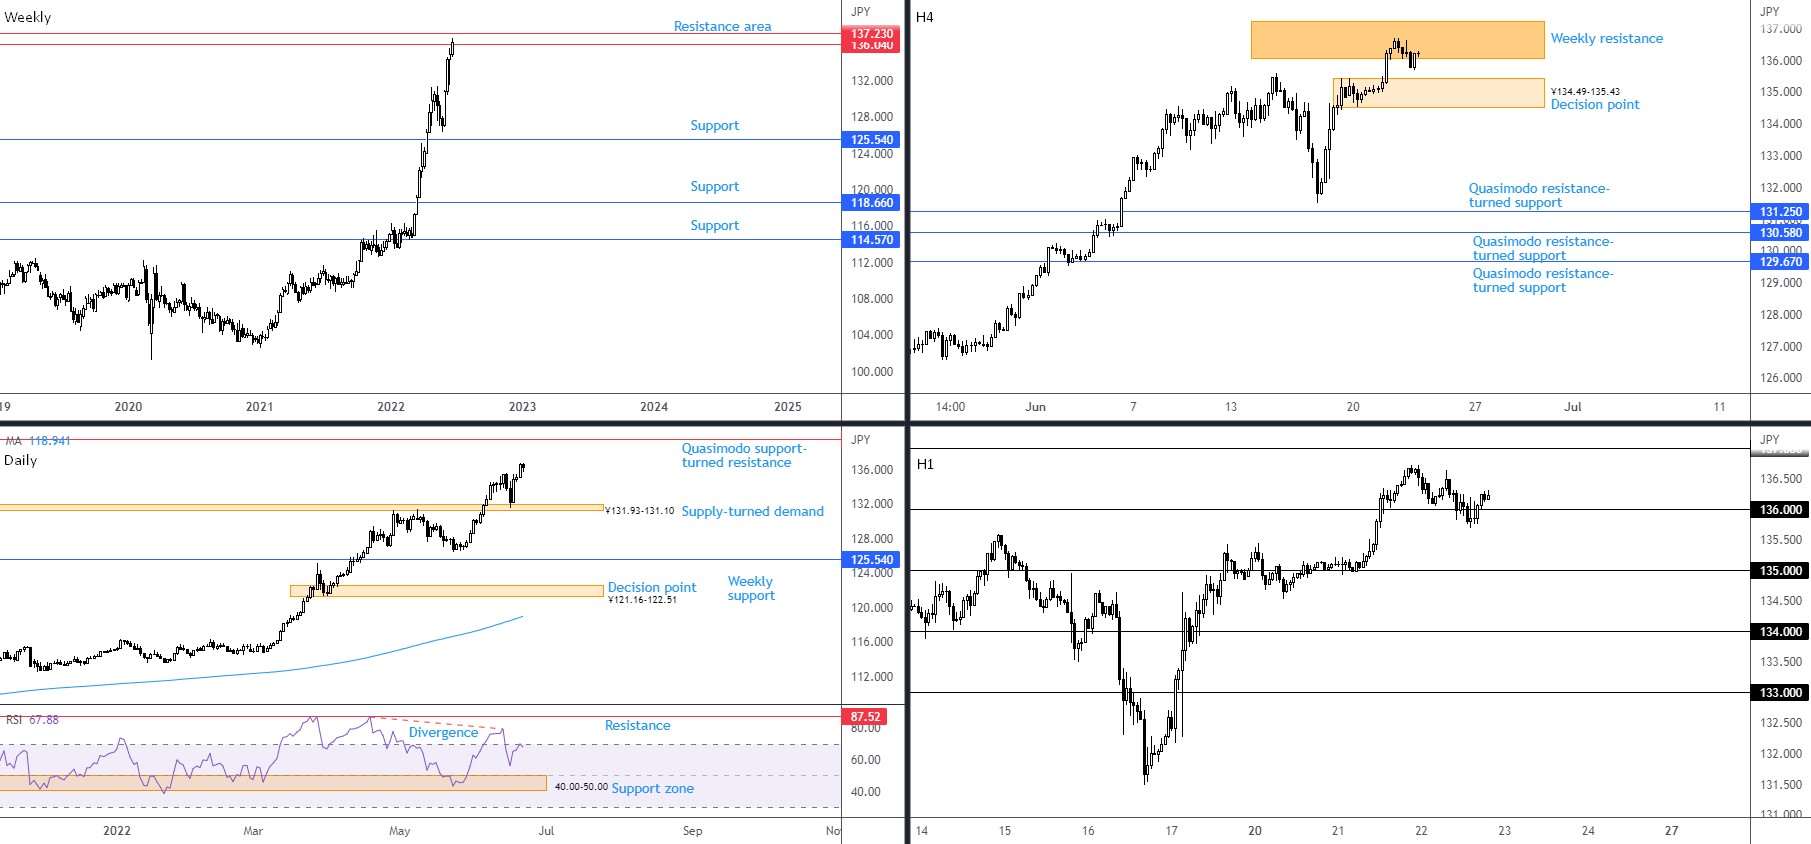 Technical View for June 23rd 2022: PMIs Eyed as EUR/USD Rebounds from Support, FP Markets